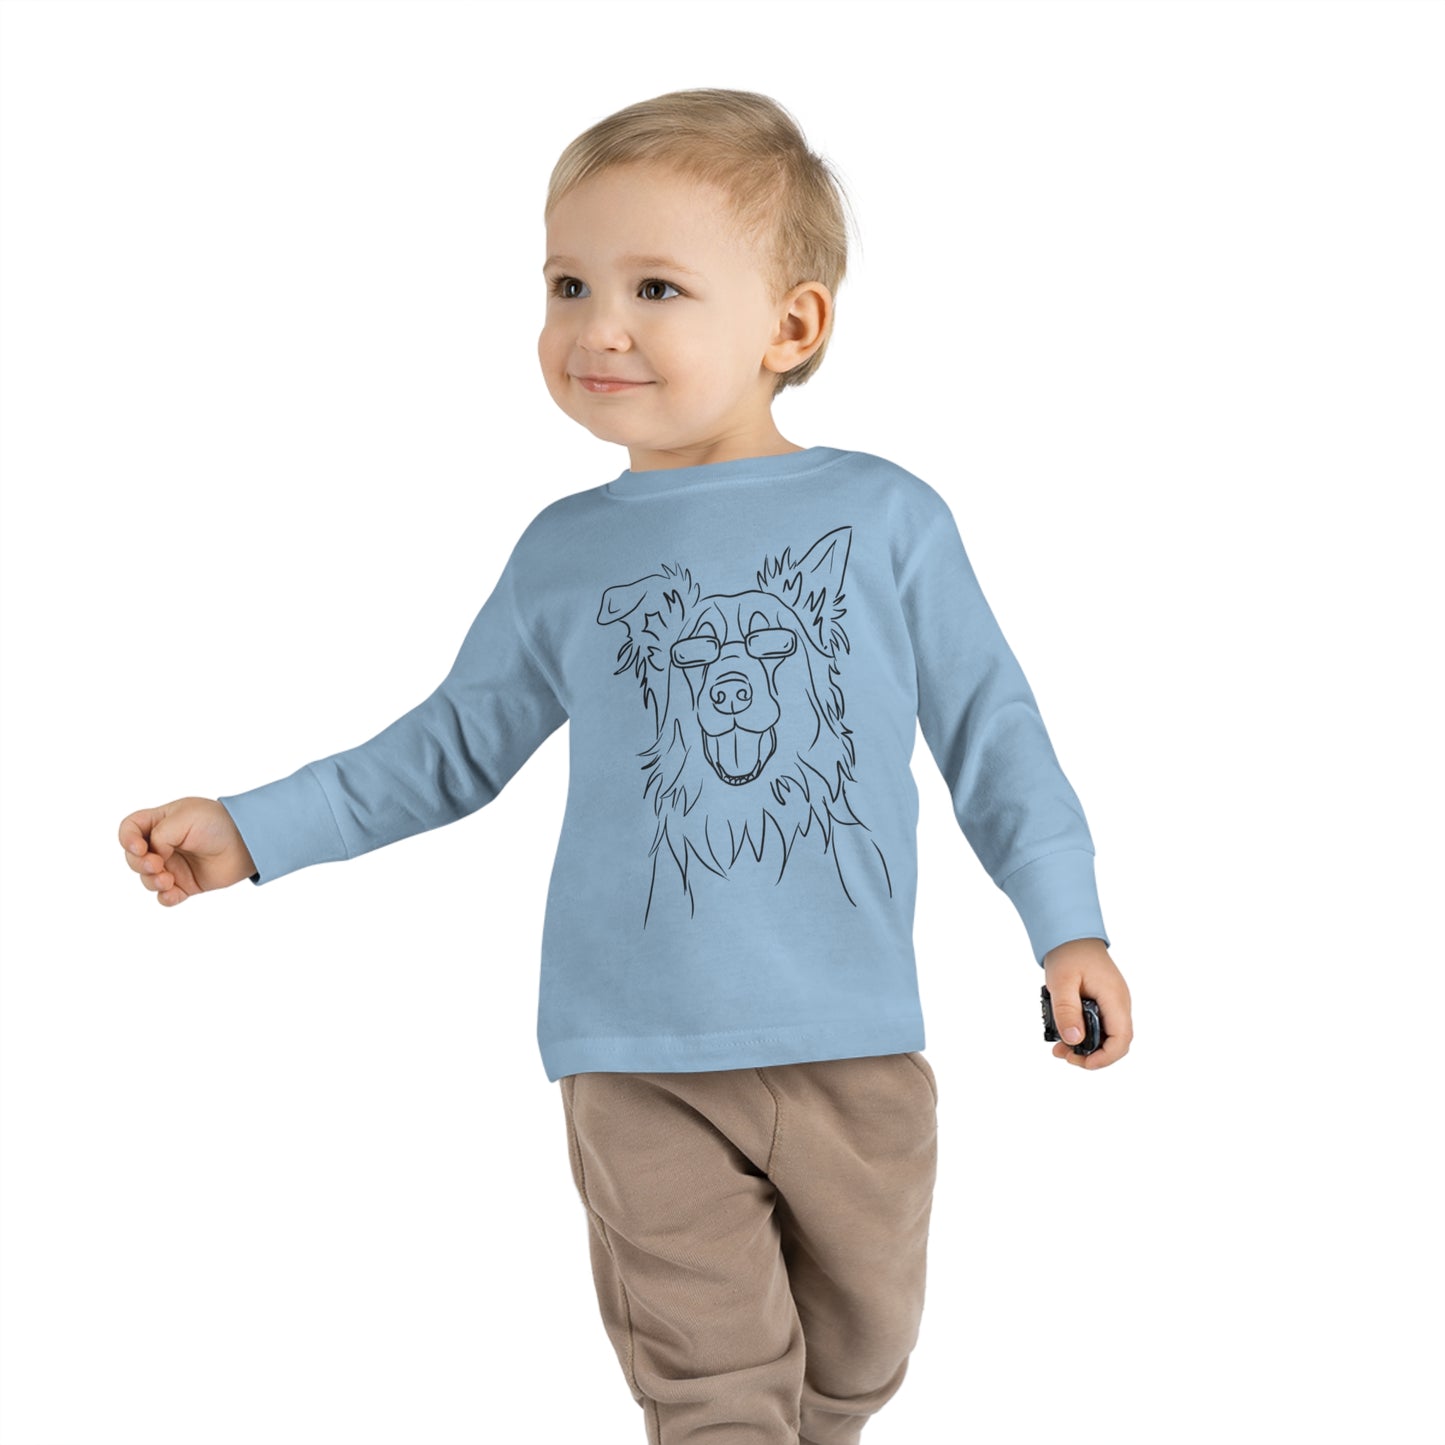 Cool Boarder Collie Toddler Long Sleeve Tee